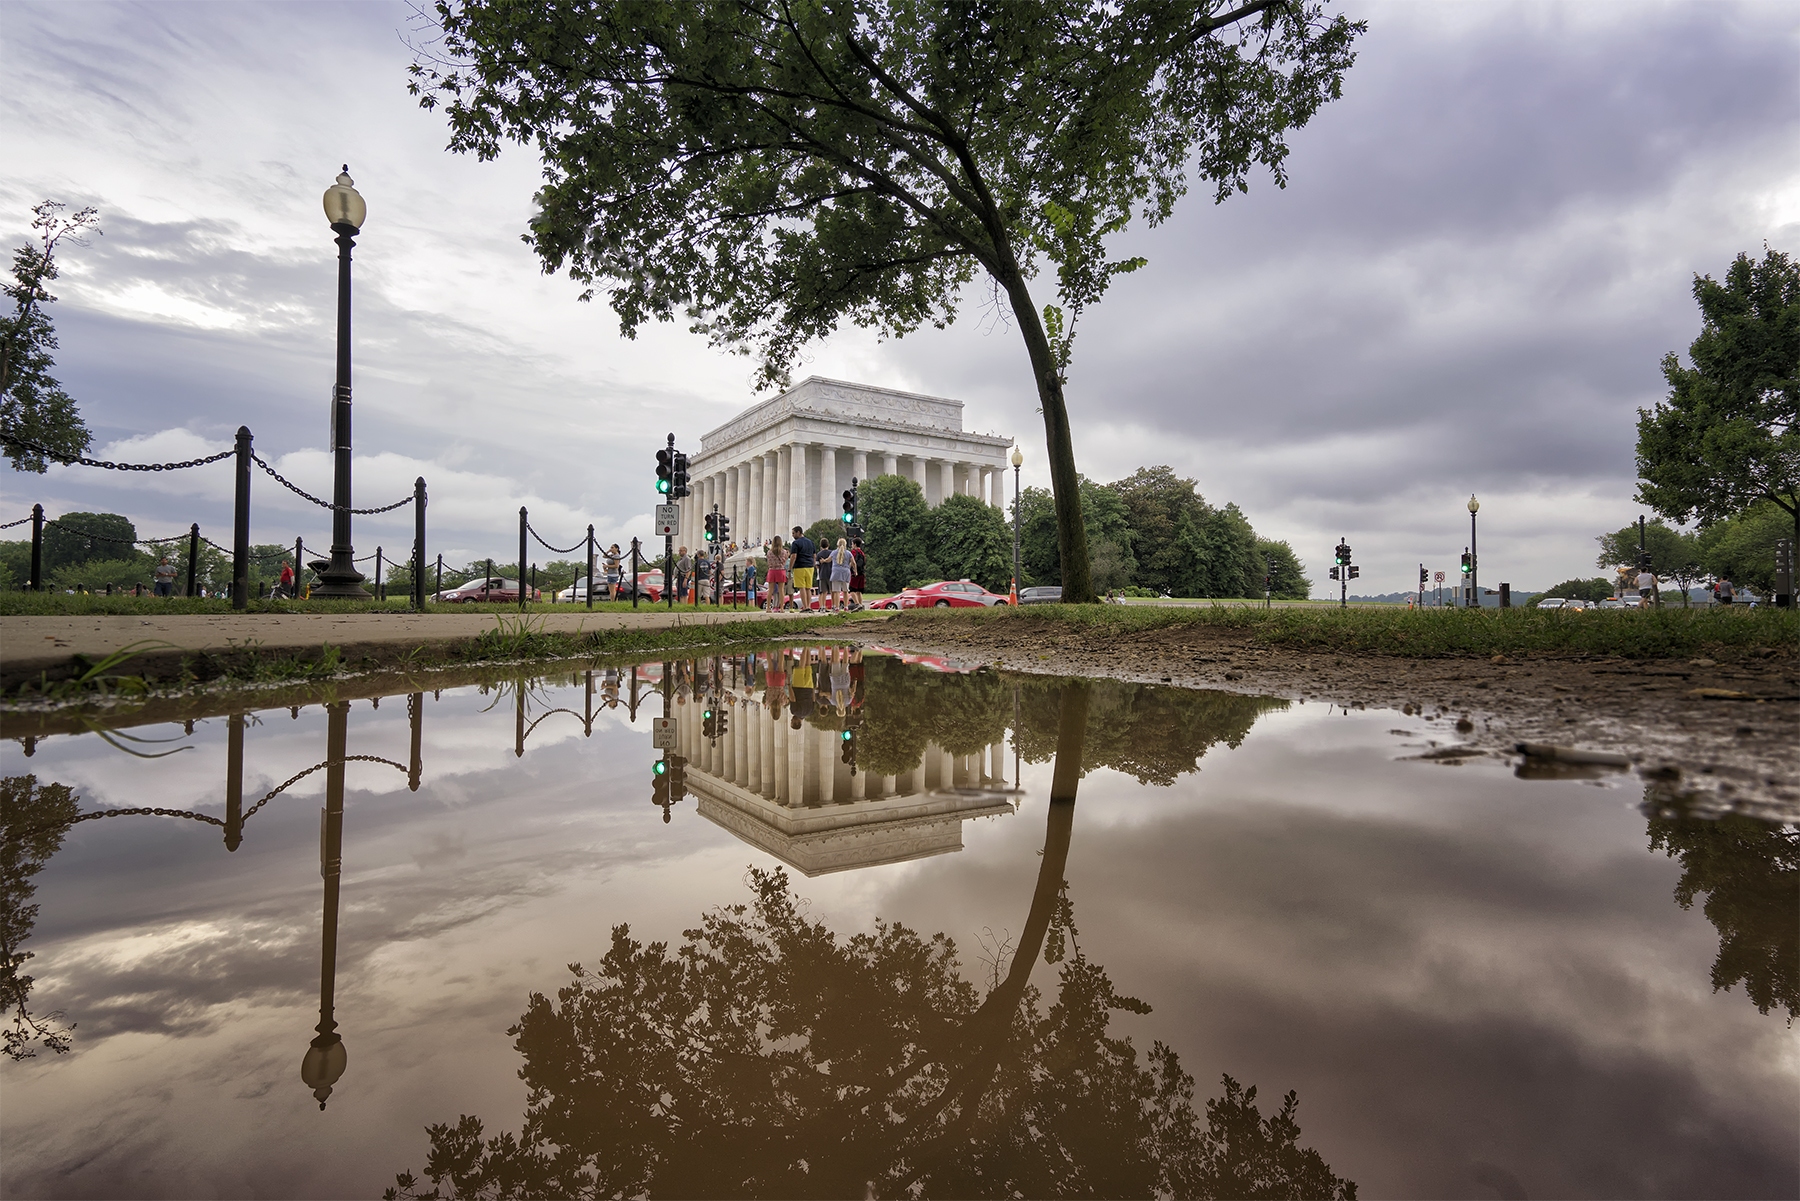 lincoln memorial, puddle, reflection, out of the ordinary, extraordinary, washington dc, reflection, tourists, visit, summer, storms, clouds, national mall, united states,